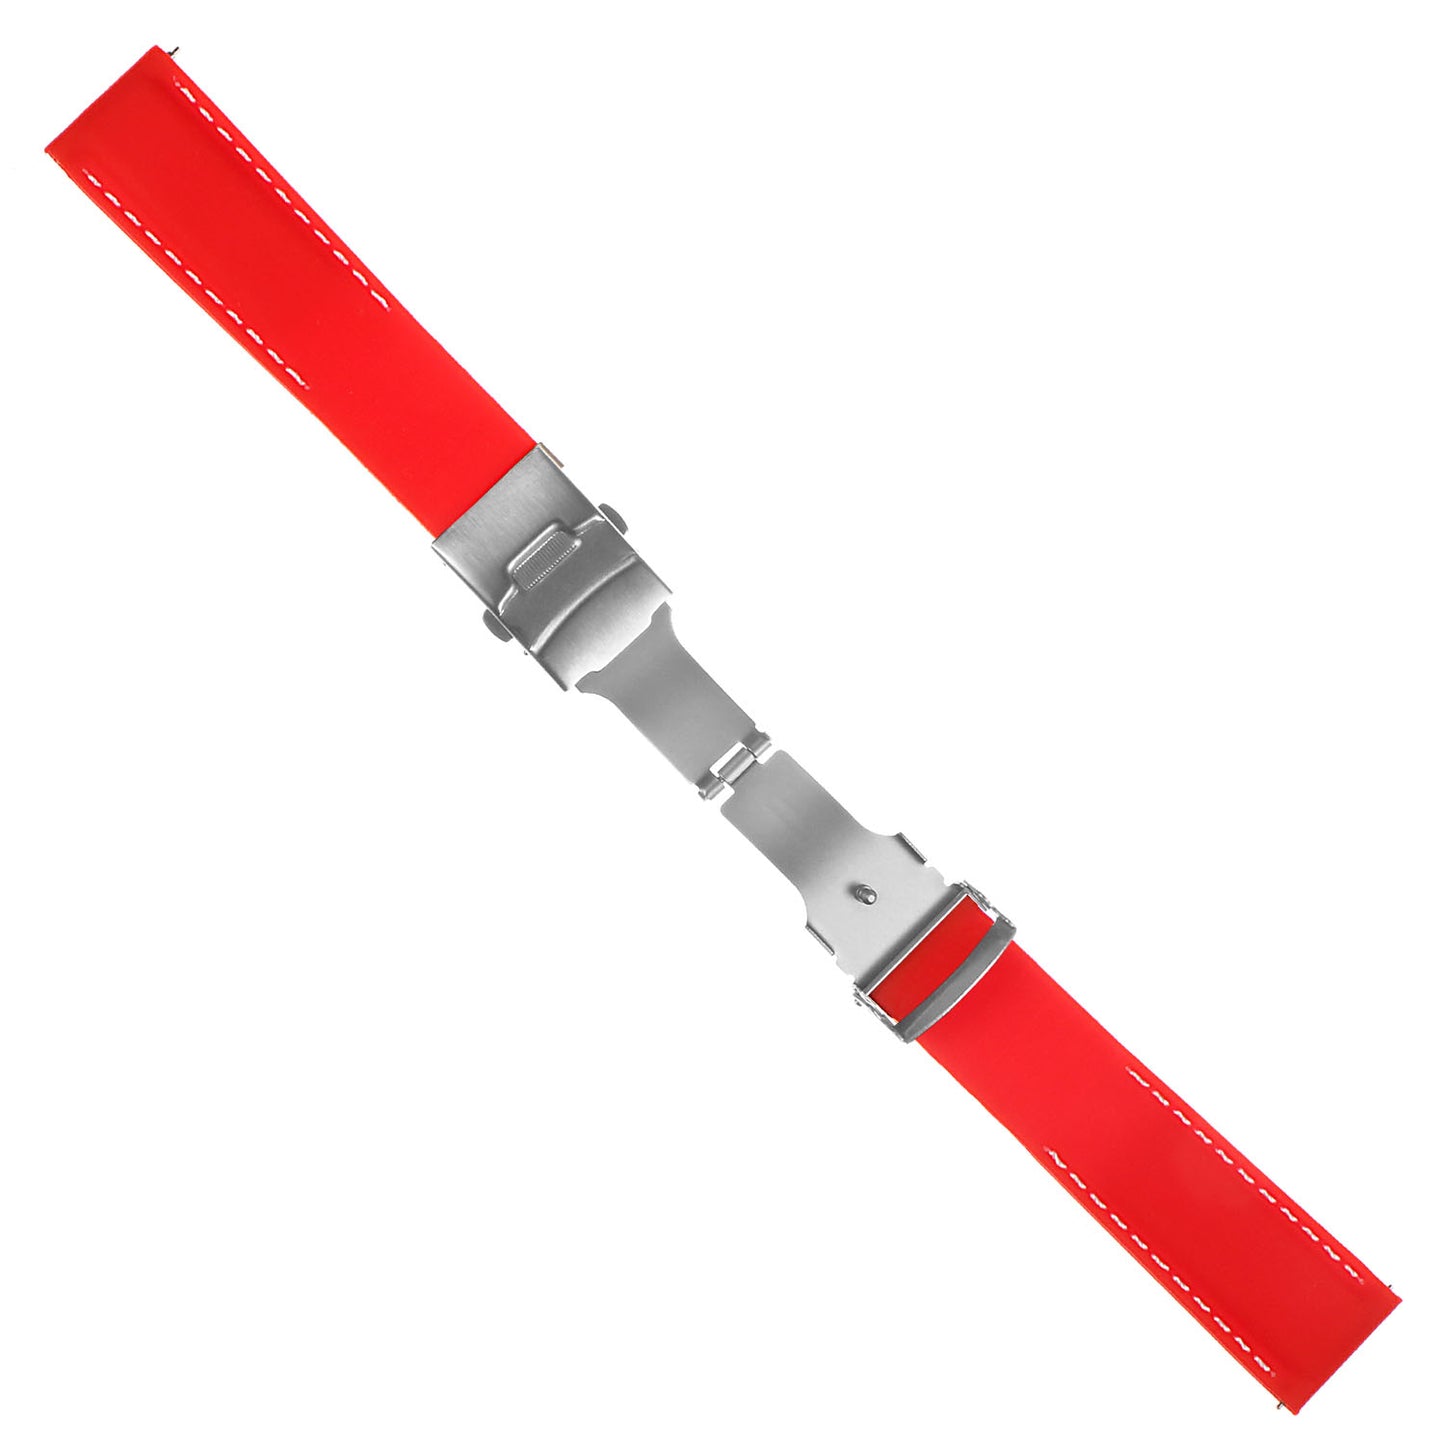 Rubber Strap with Stitching & Clasp - Quick Release